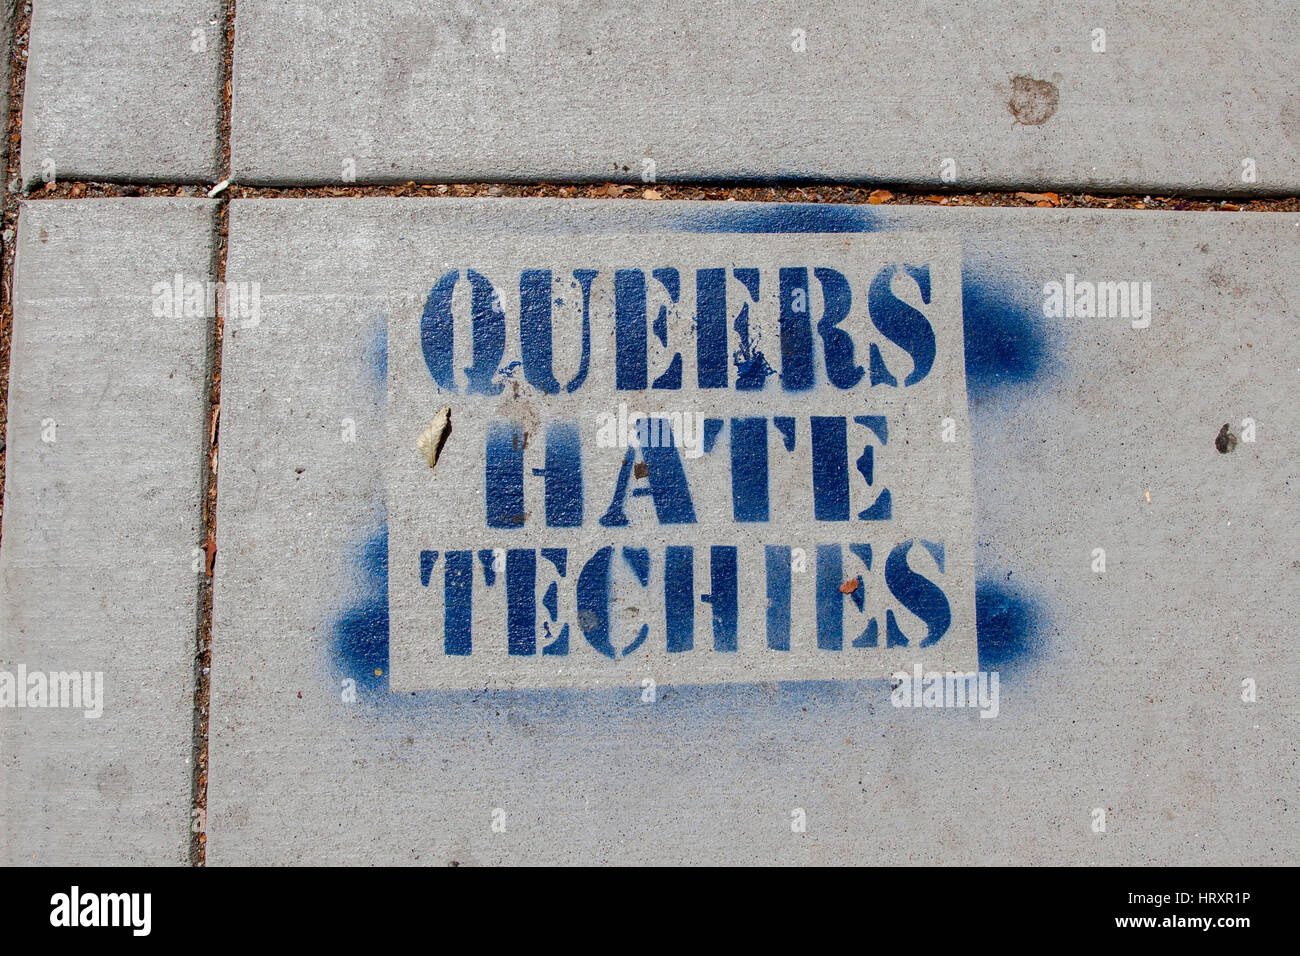 There is no reason as to why 'Queers Hate Techies' in The Mission District of San Francisco in California. Stock Photo